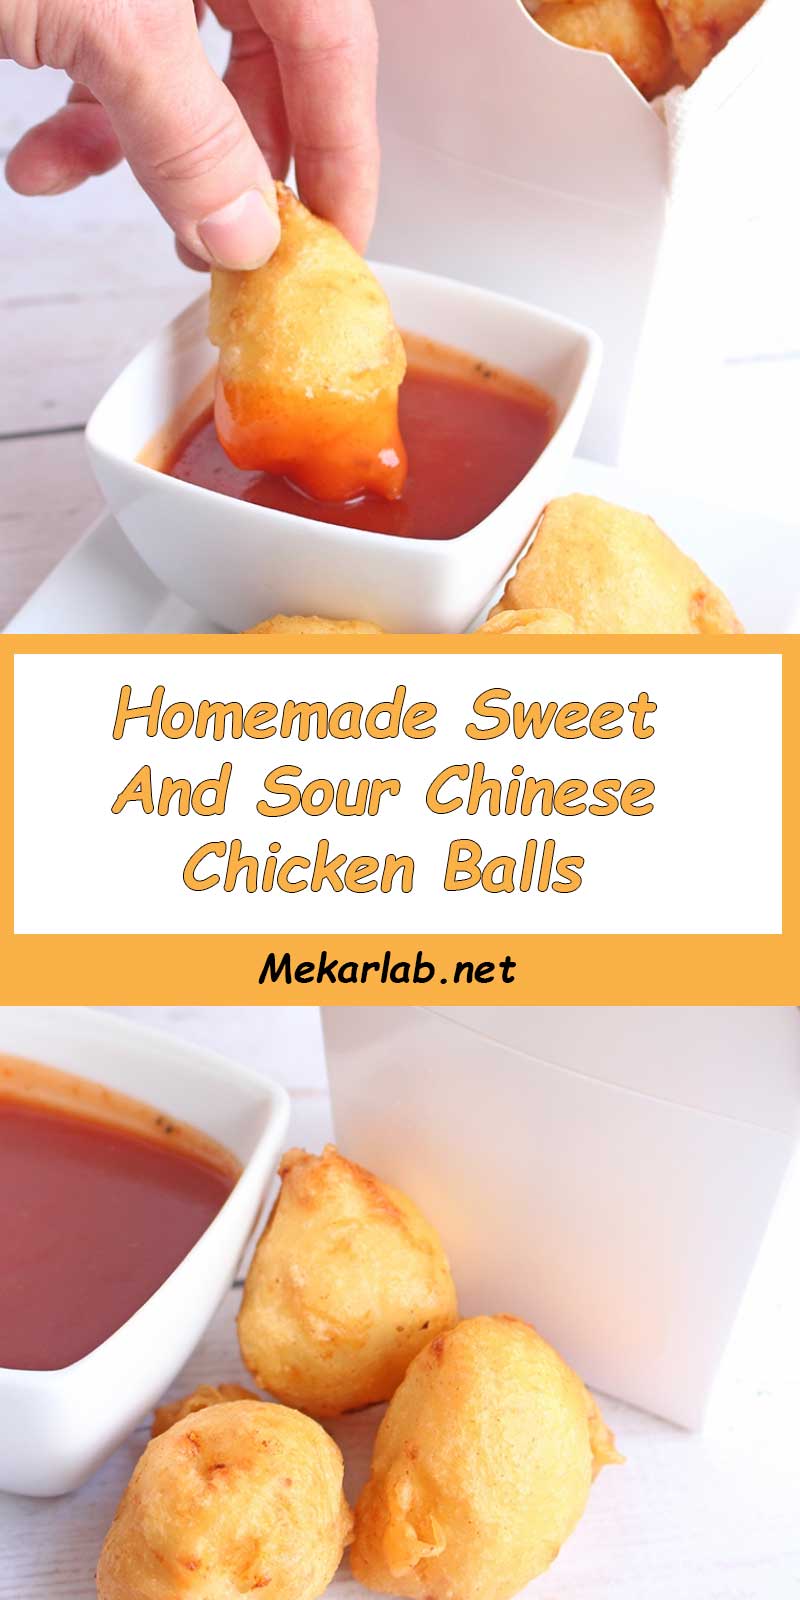 Homemade-Sweet-And-Sour-Chinese-Chicken-Balls